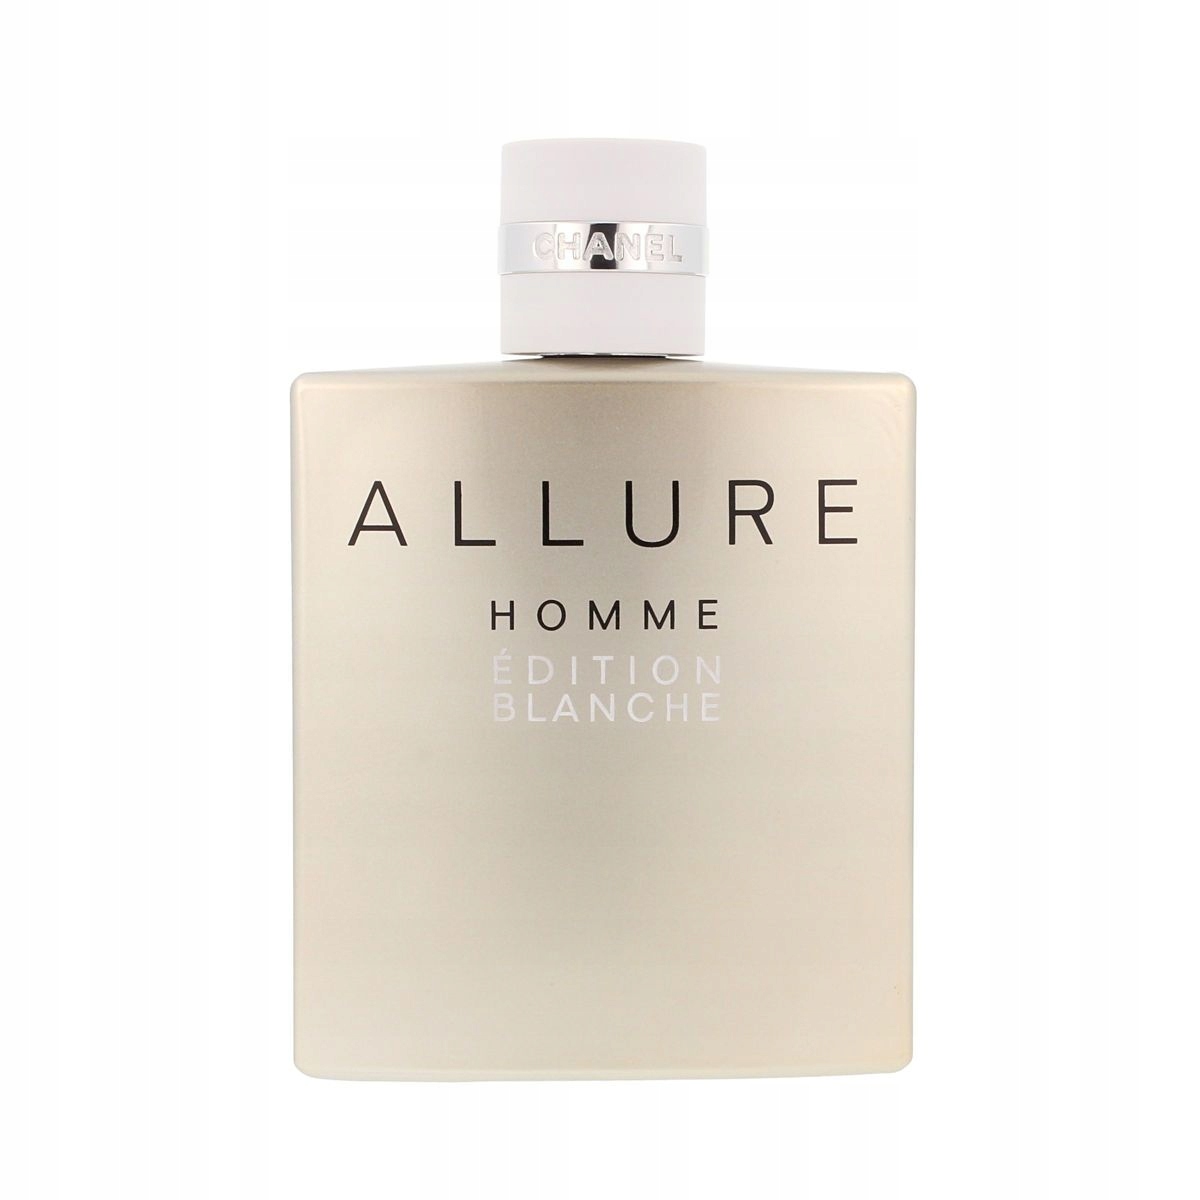 Chanel homme edition blanche. Духи Шанель Аллюр. Шанель Аллюр мужские. Chanel Allure homme Edition Blanche 100ml. Chanel Allure homme Sport Edition Blanche.